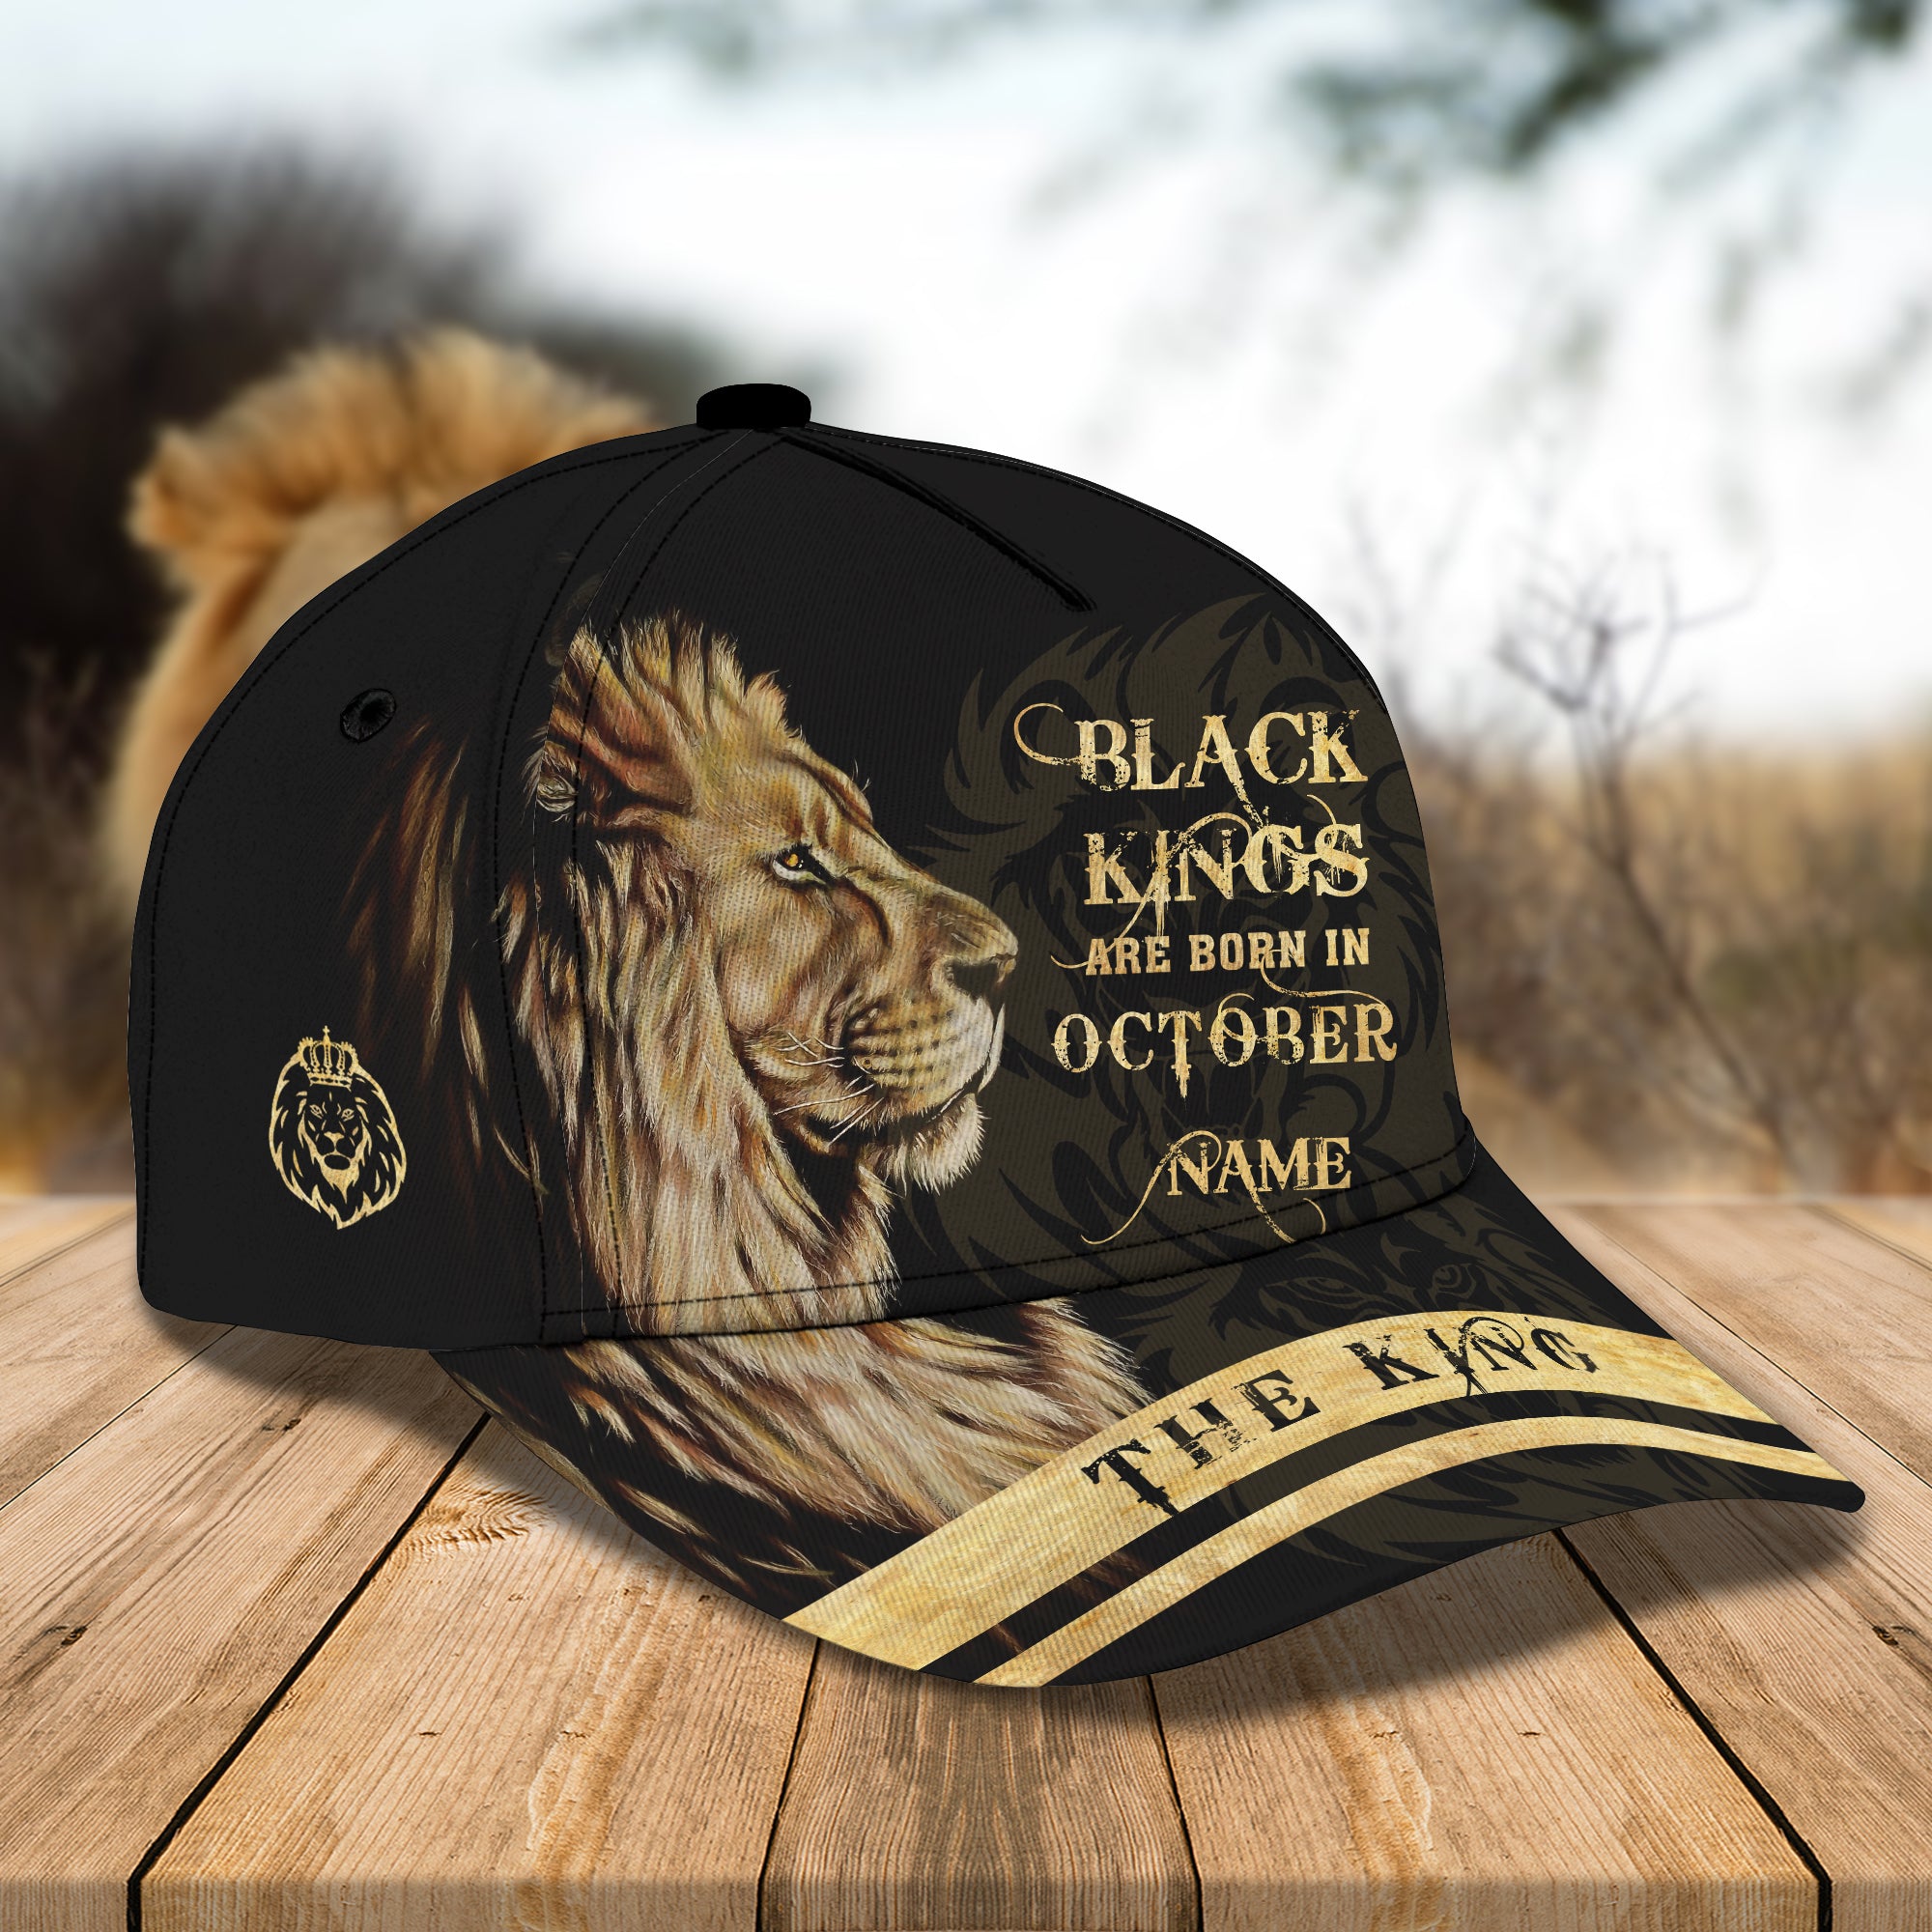 Black Kings Are Born In October - Personalized Name Cap 38 - Bhn97